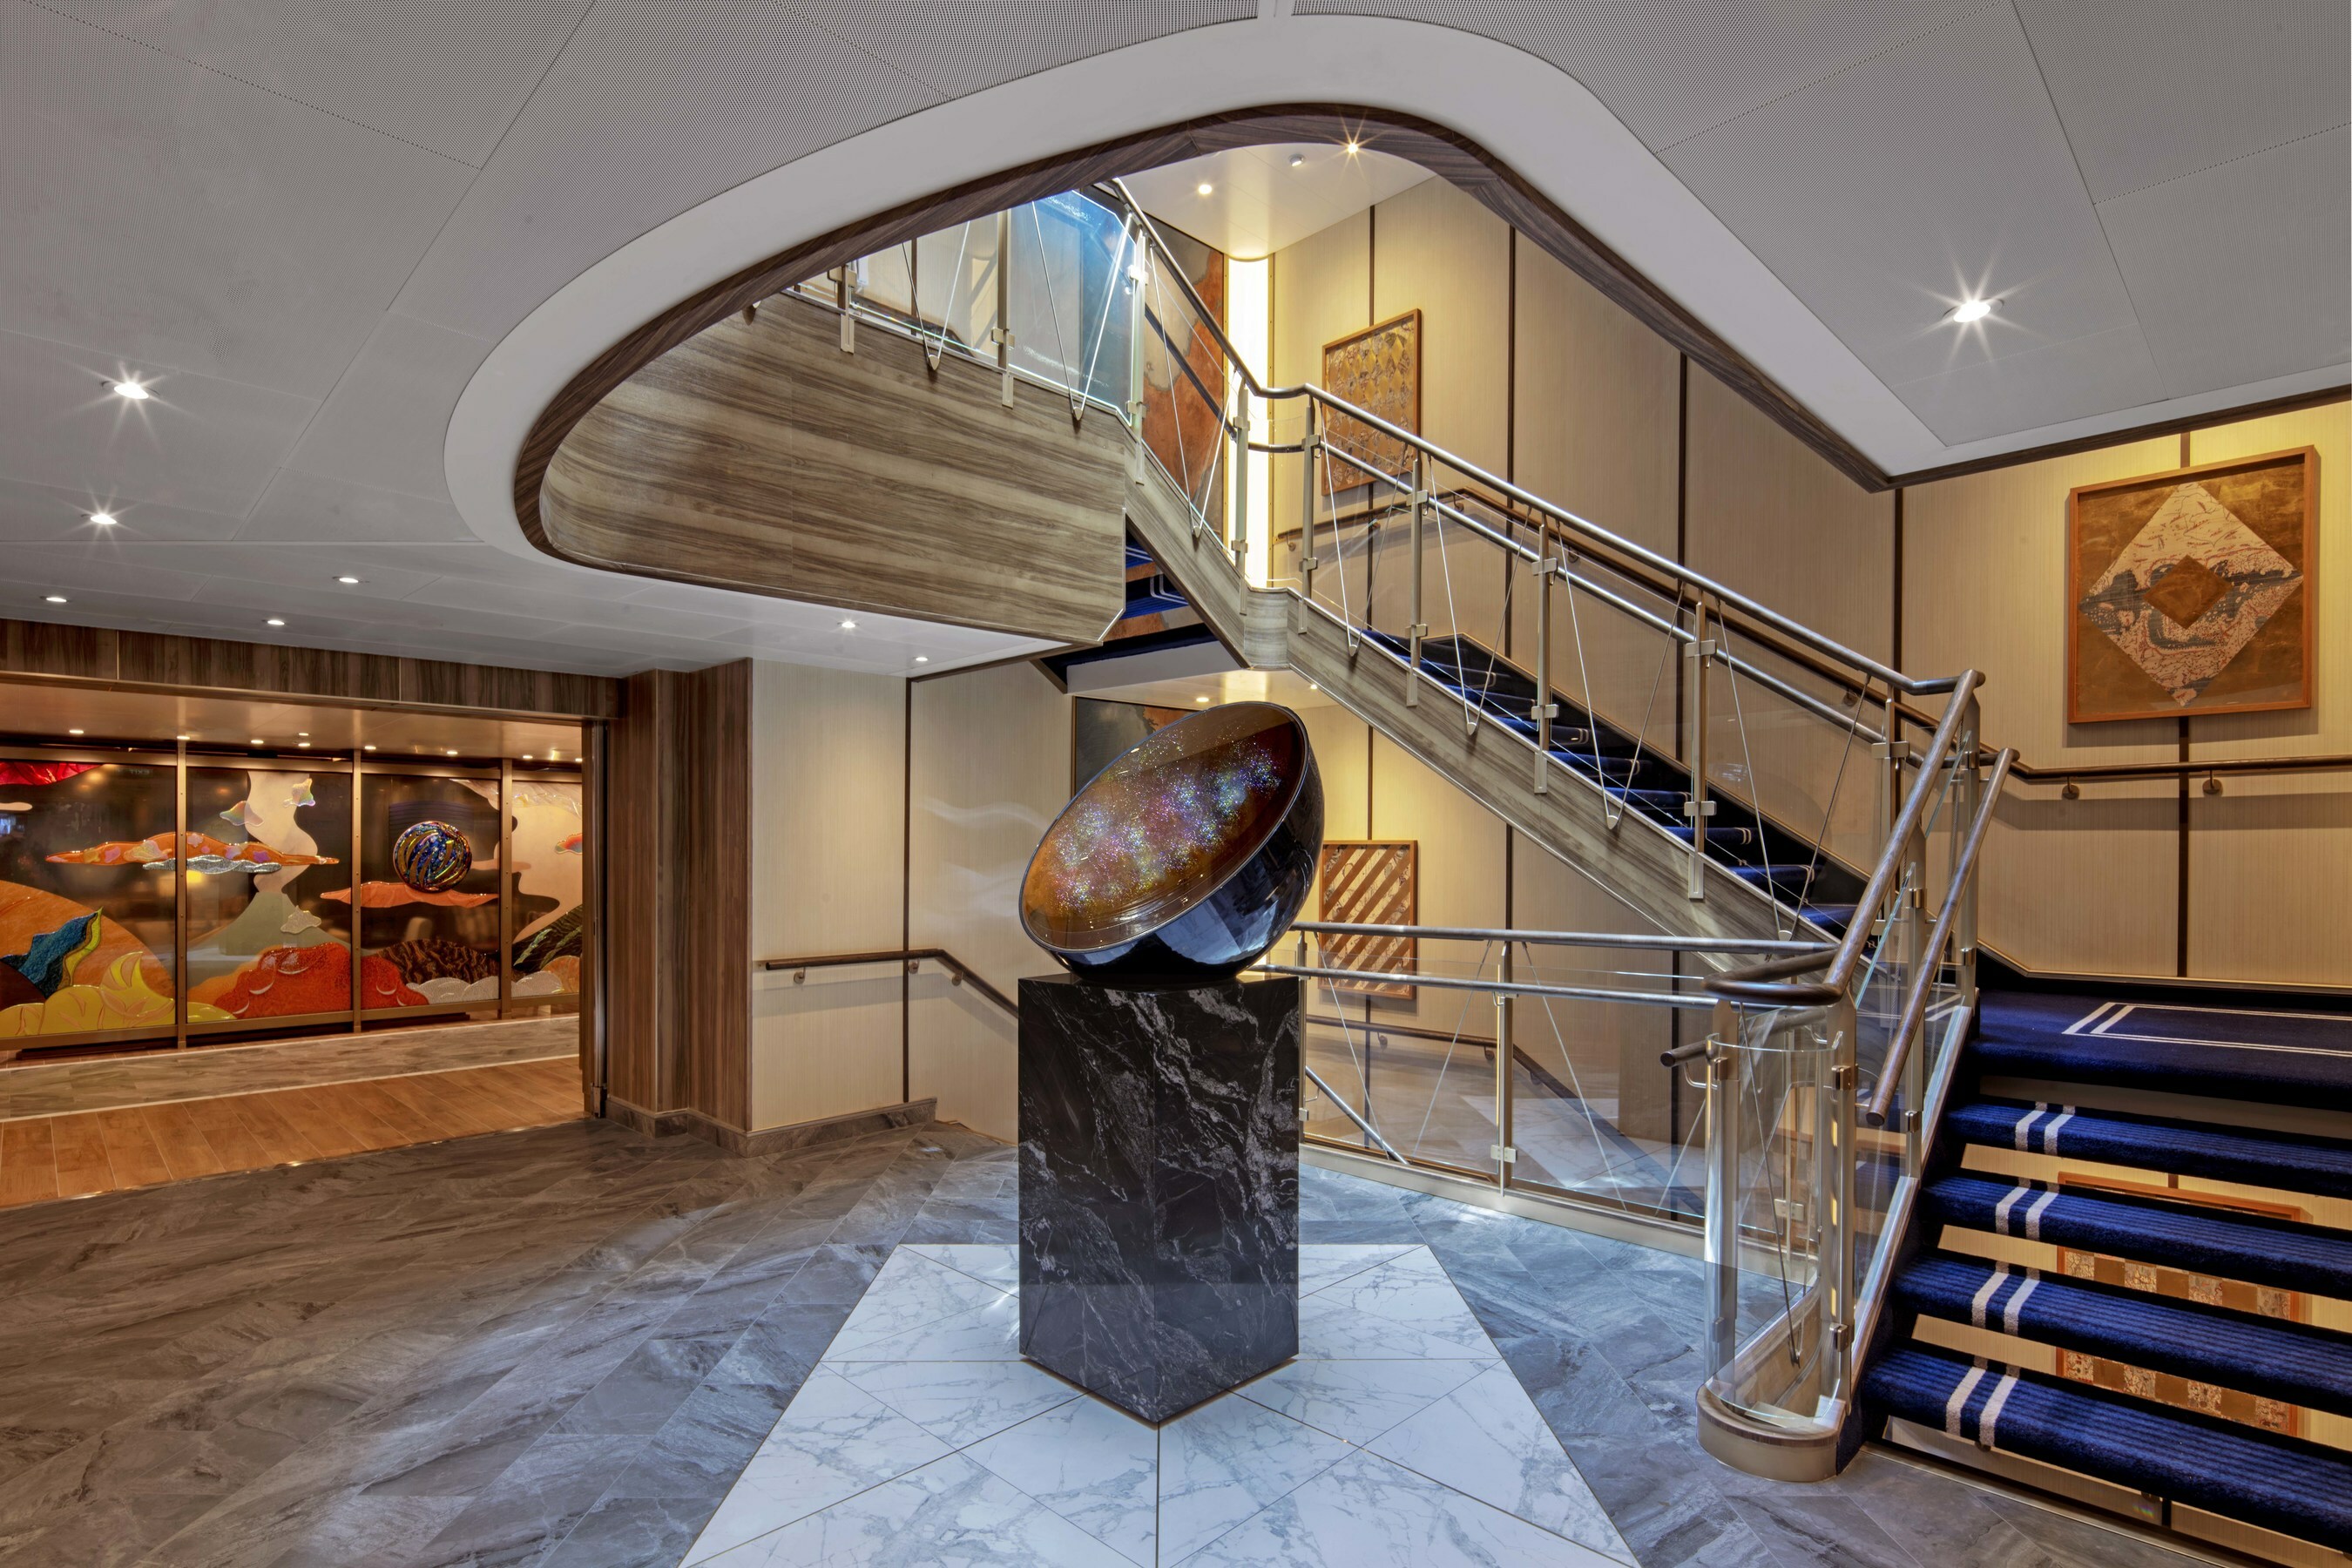 Seabourn Pursuit Unveils Masterfully Curated Art Collection, Custom Works Inspired By The Spirit Of Exploration And Wondrous Global Discoveries - Seabourn Pursuit Atrium - Magical Sky Sculpture (Image at LateCruiseNews.com - August 2023)